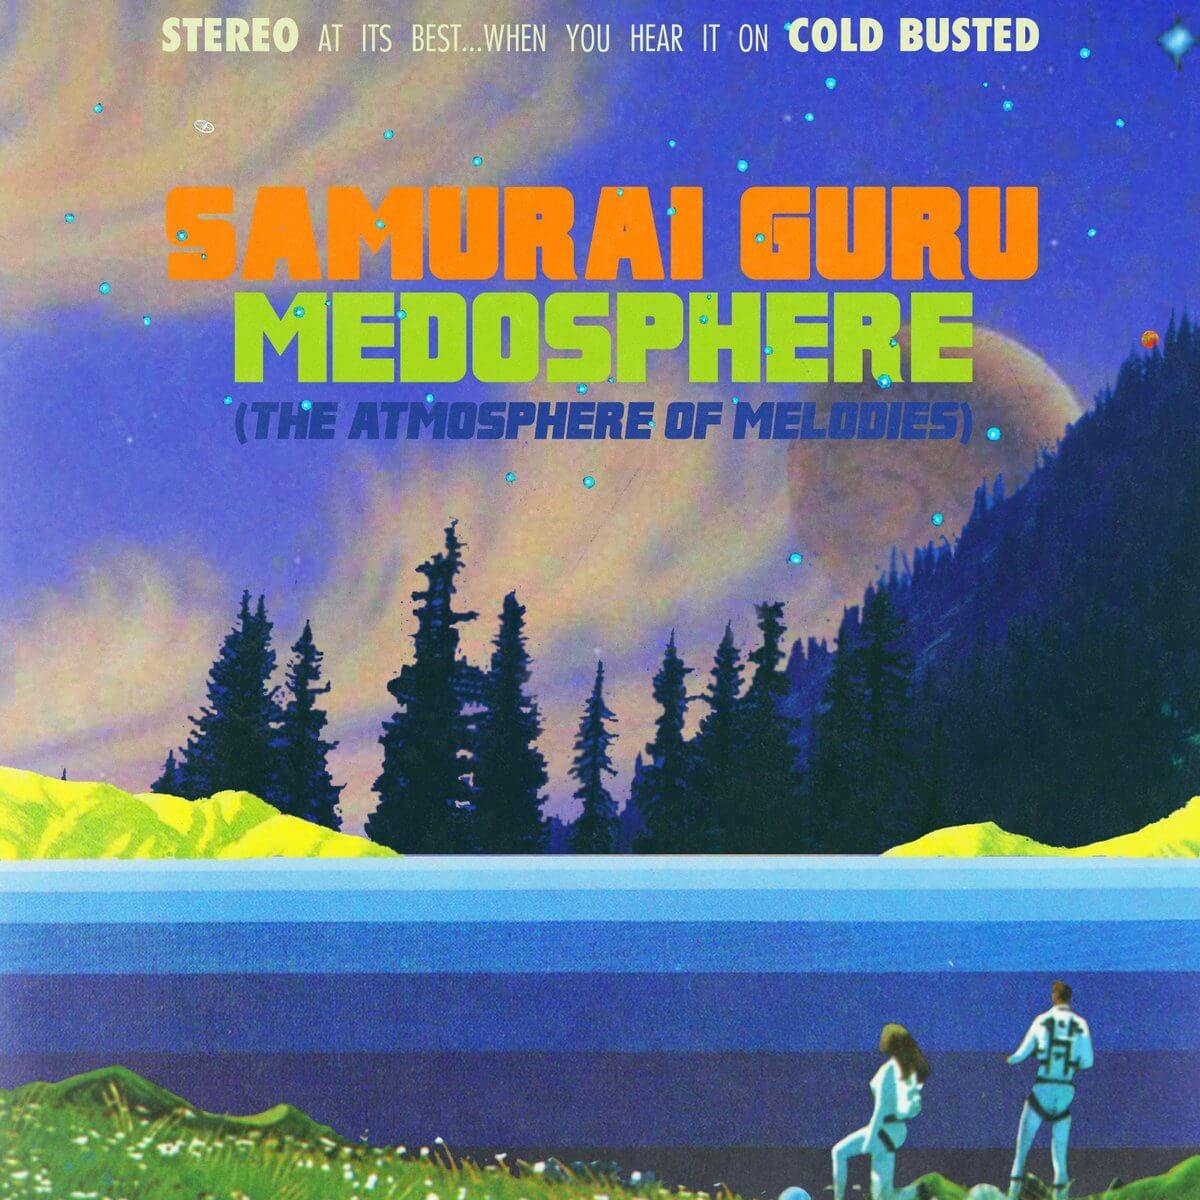 Samurai Guru - Medosphere (The Atmosphere Of Melodies) - Limited Edition Compact Disc - Cold Busted